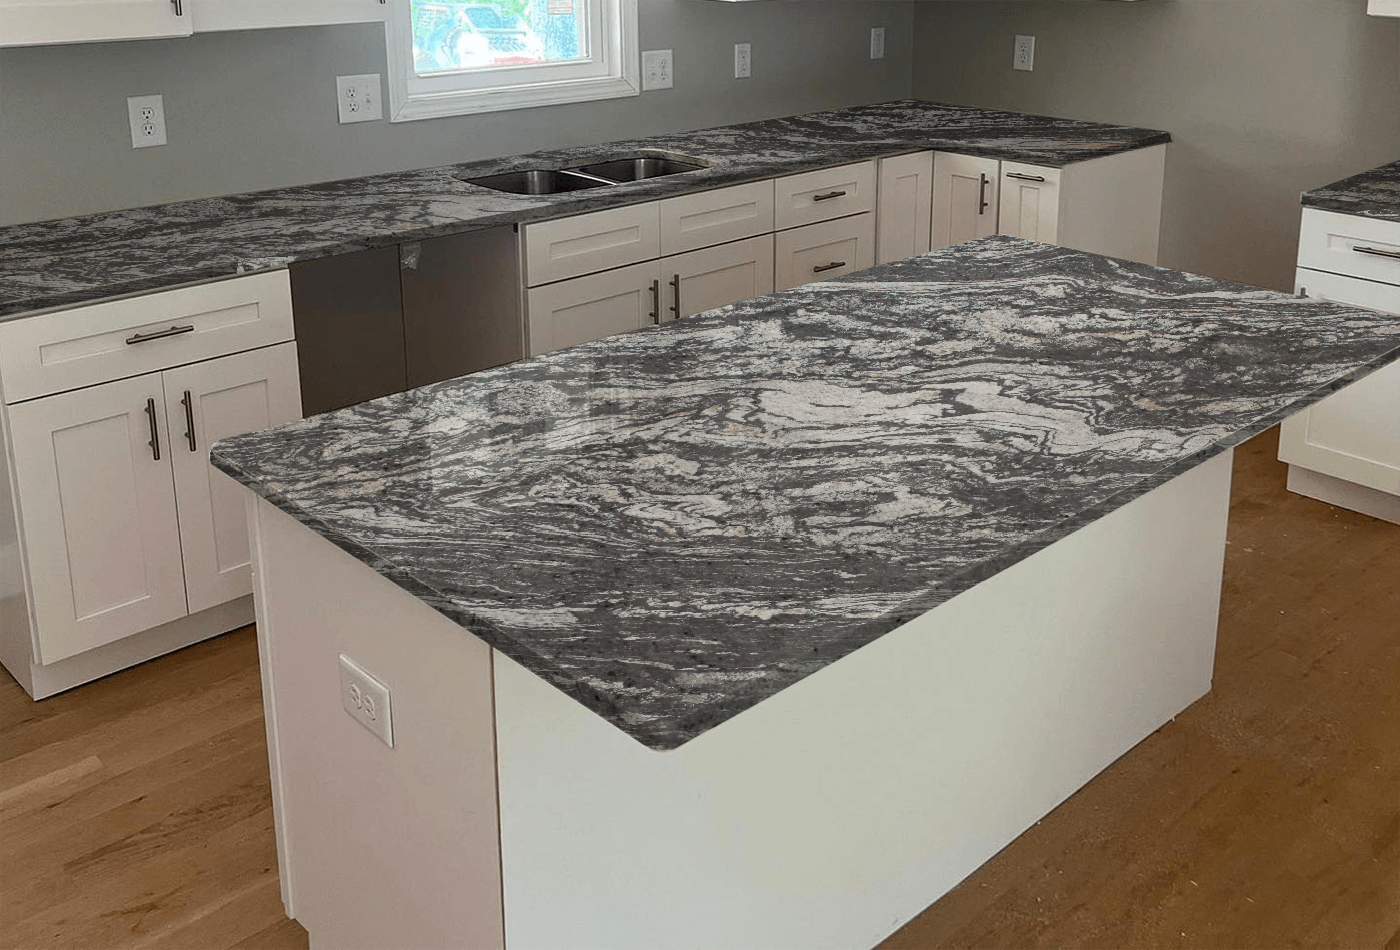 Ideas for kitchen decoration with a black granite countertop